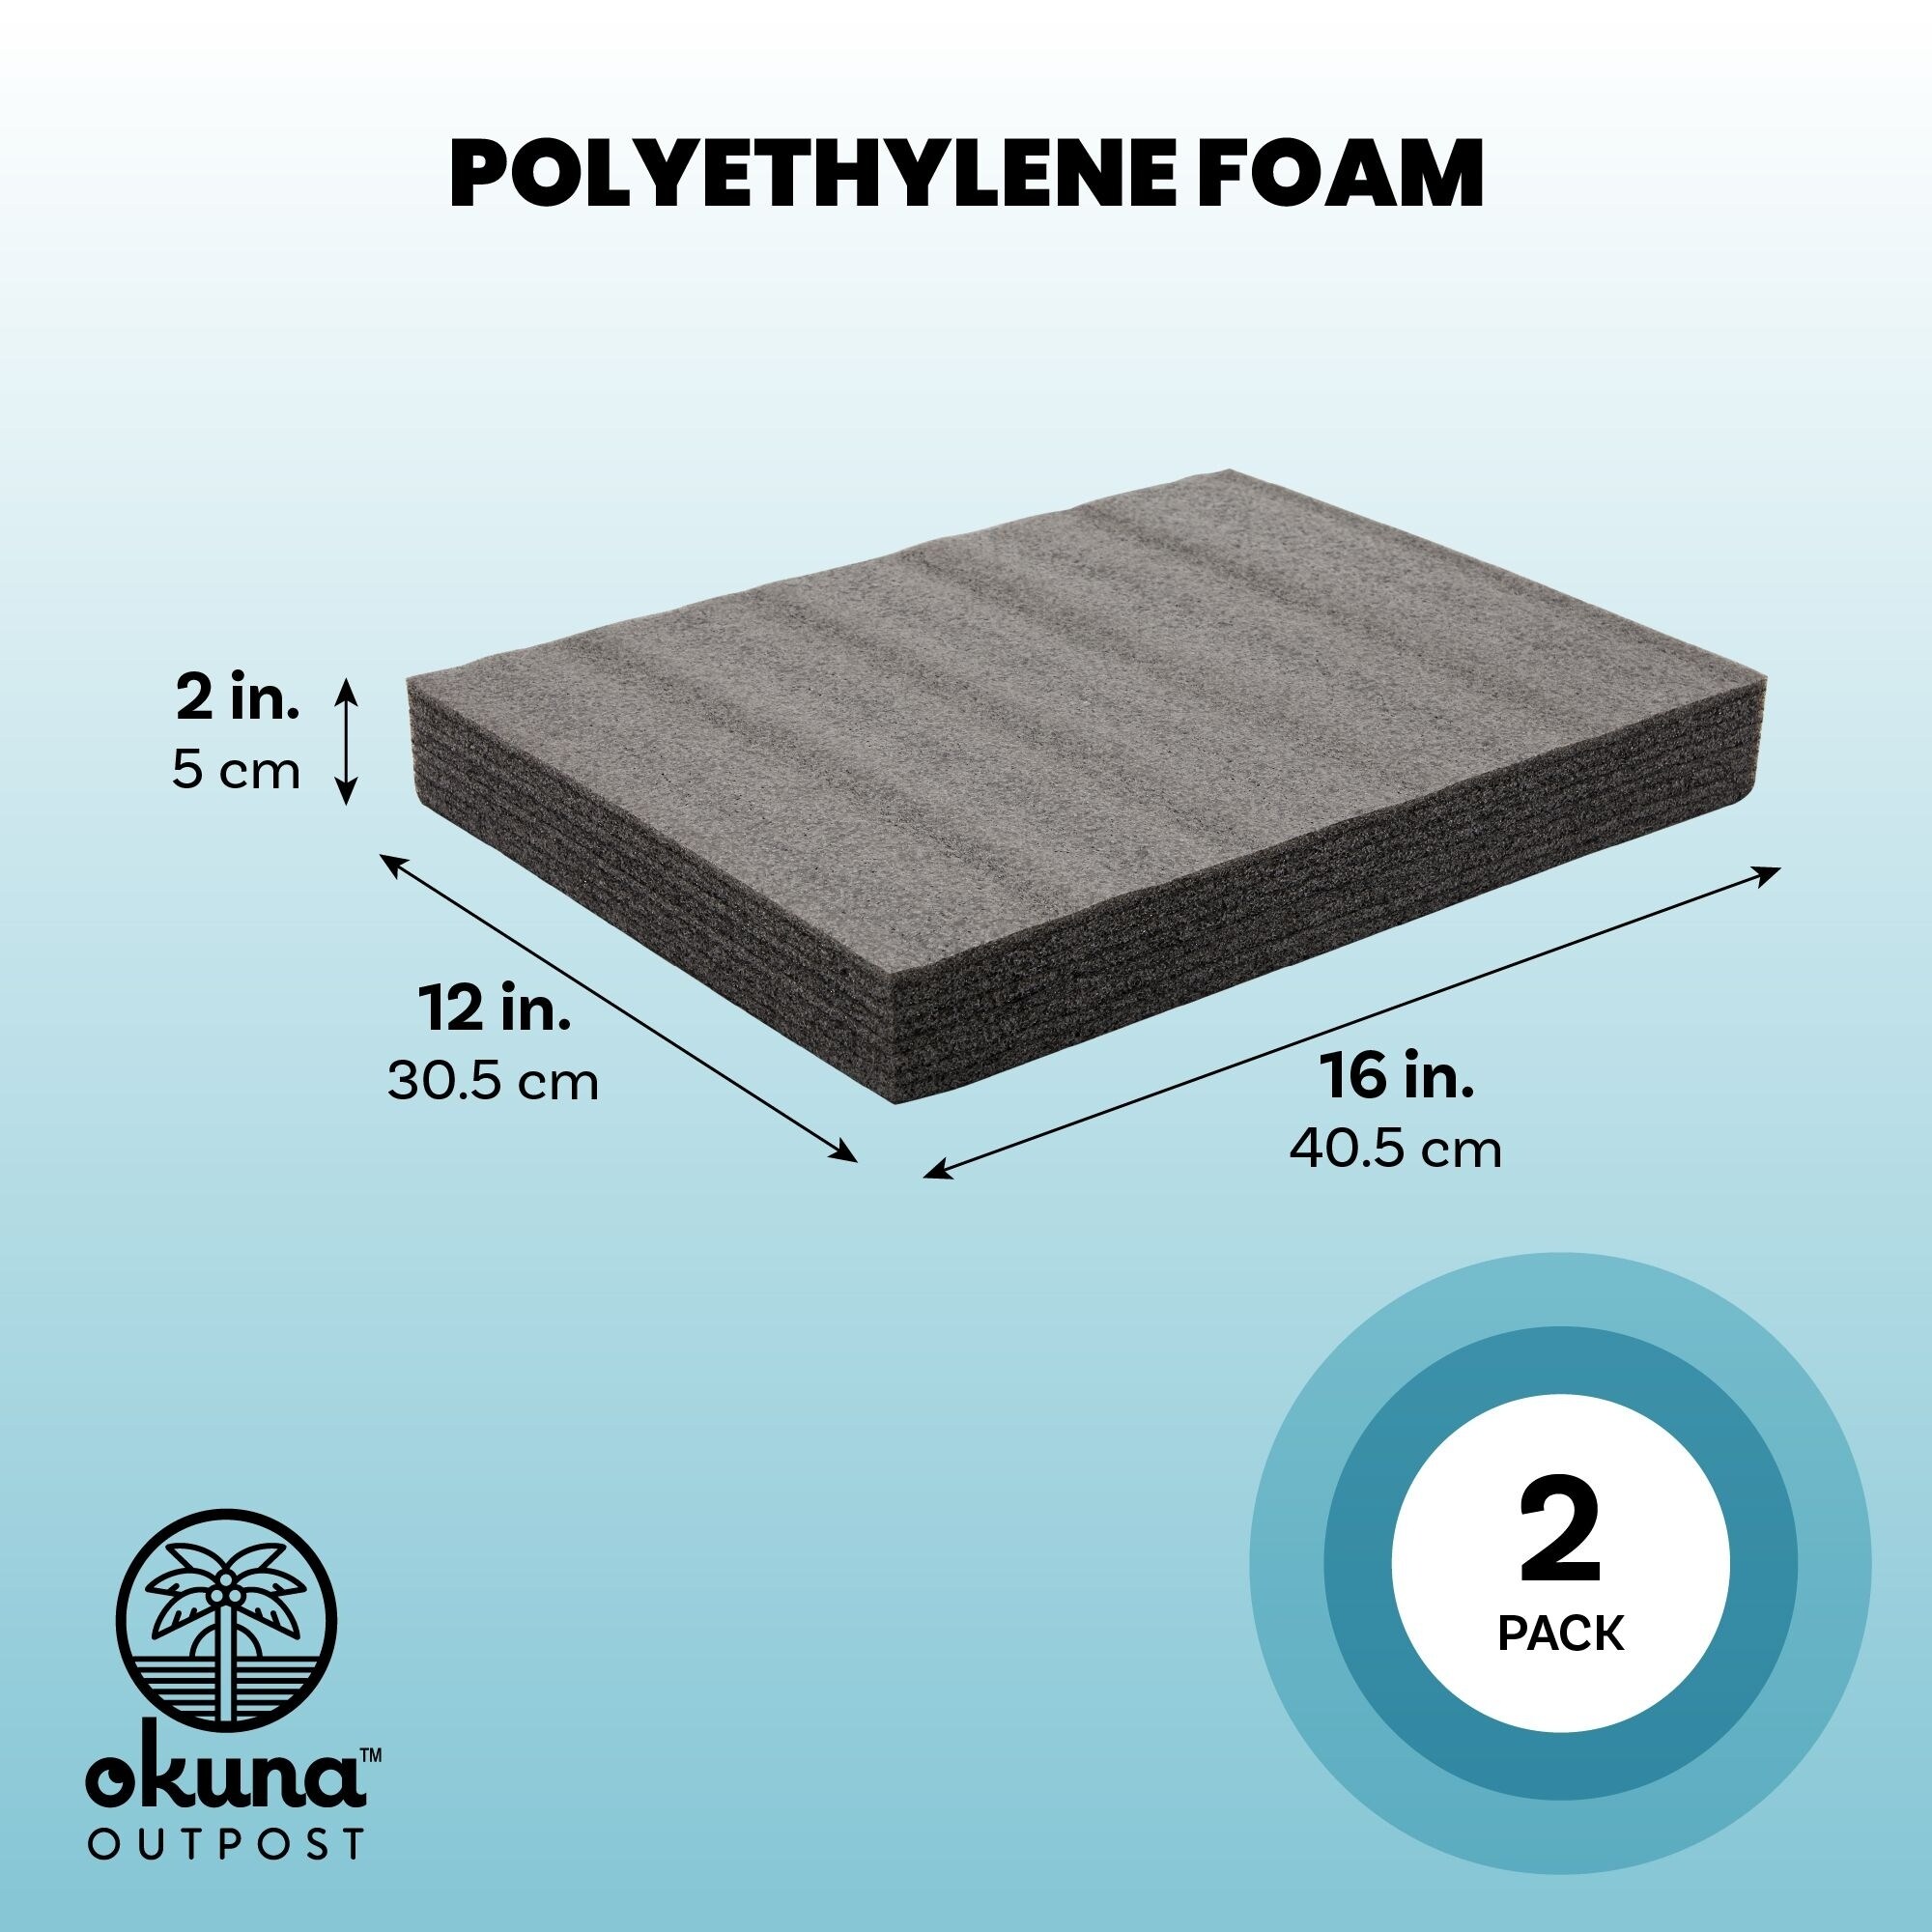 2 Pack Black Packing Foam Sheets, 2 inch Polyurethane Cushioning Inserts for Cases, Moving, 12 x 16 in